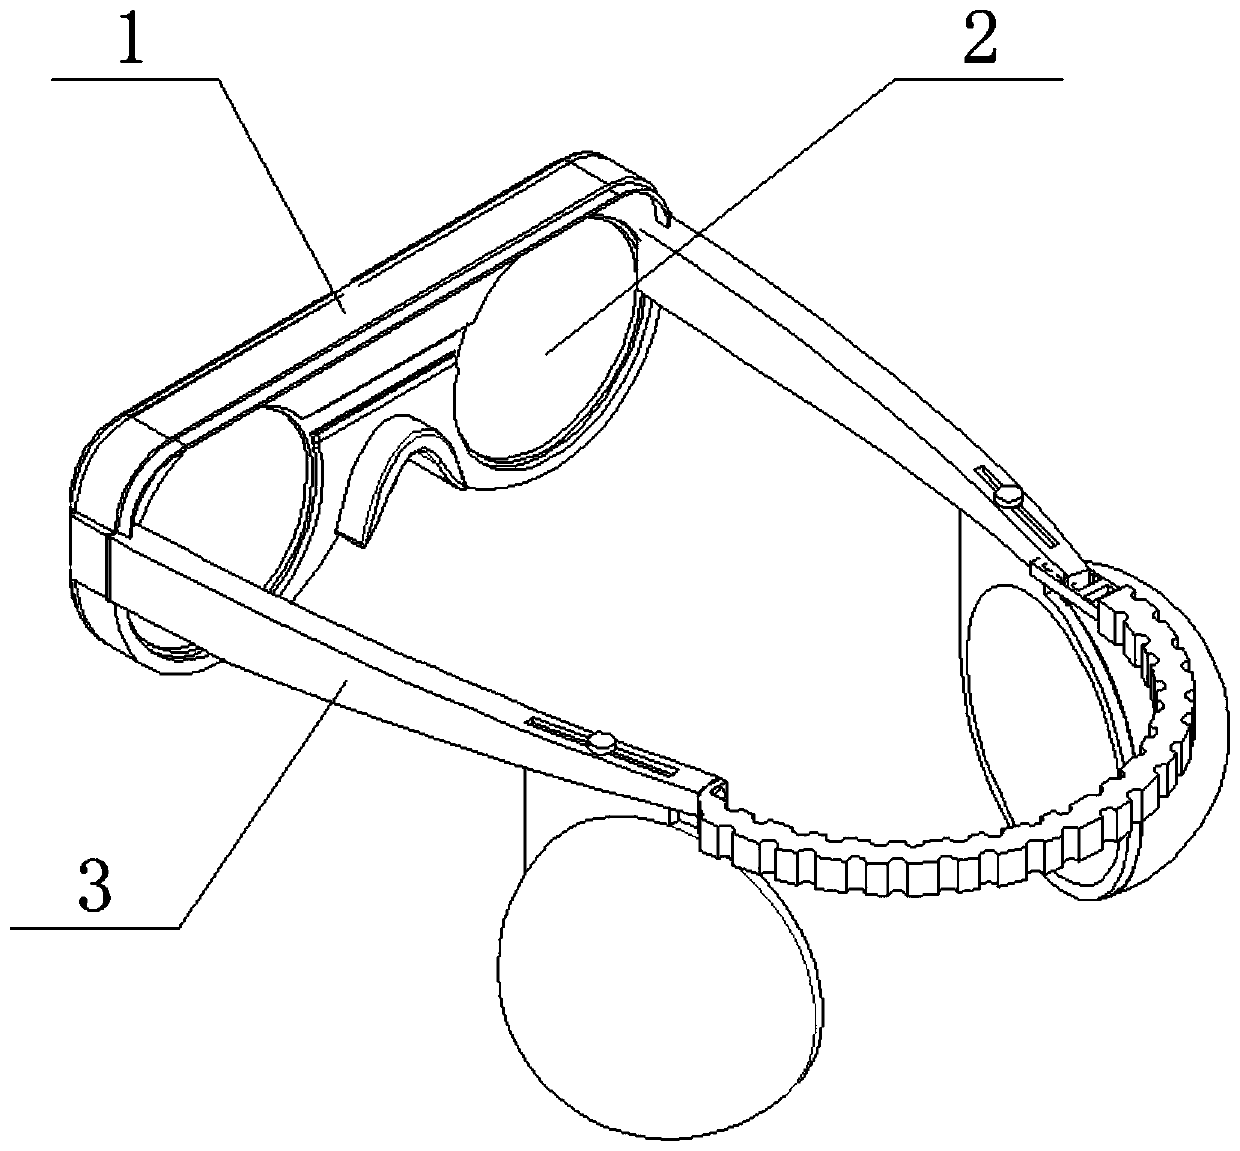 Multi-layer protective outdoor glasses